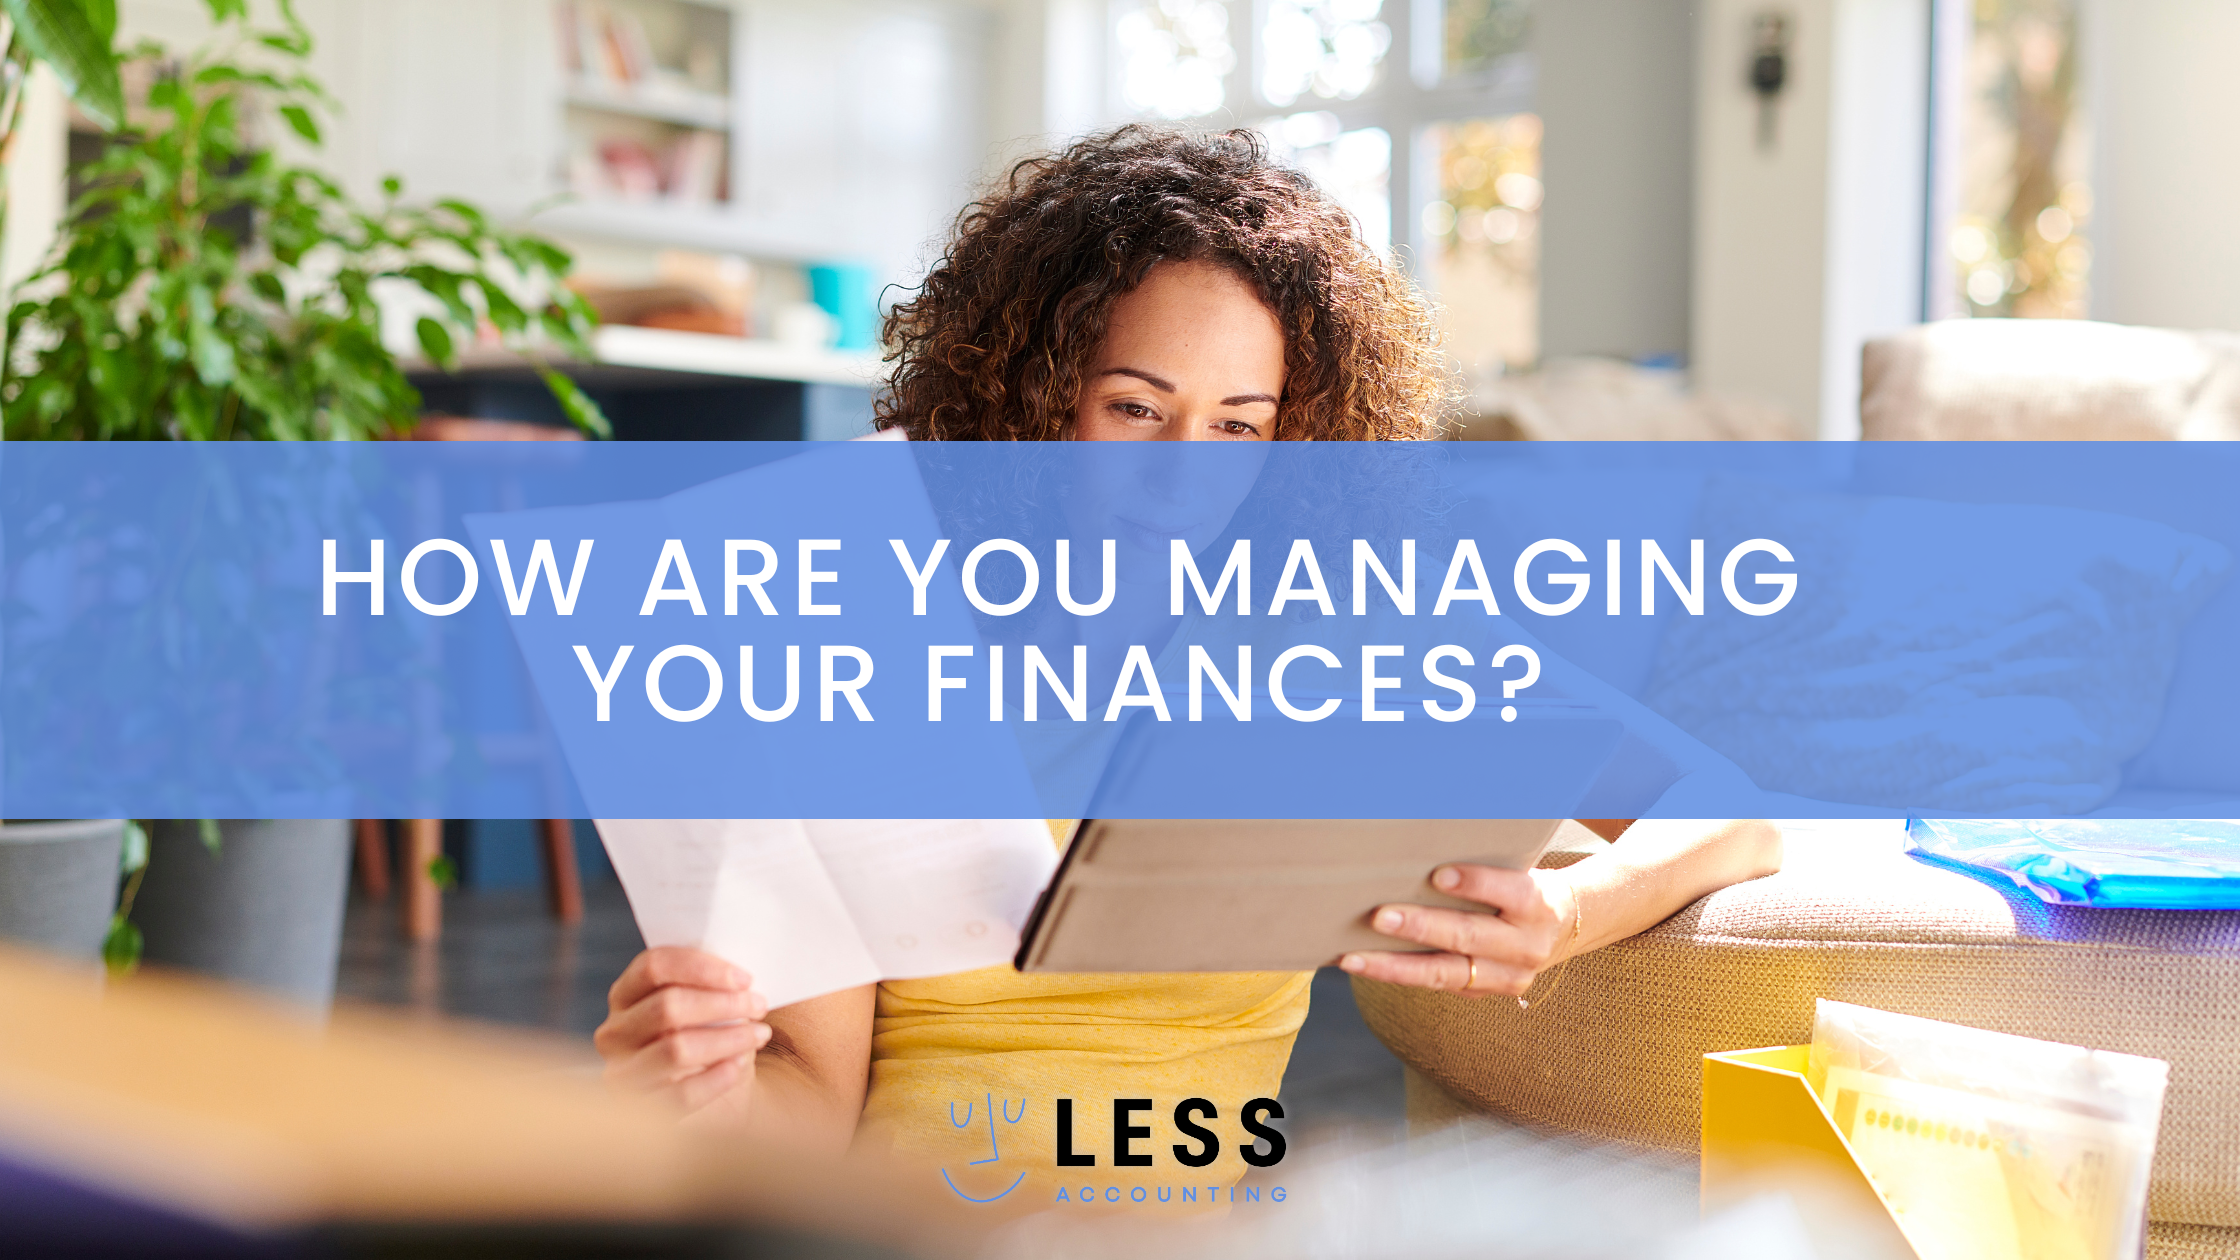 How are you managing your finances?